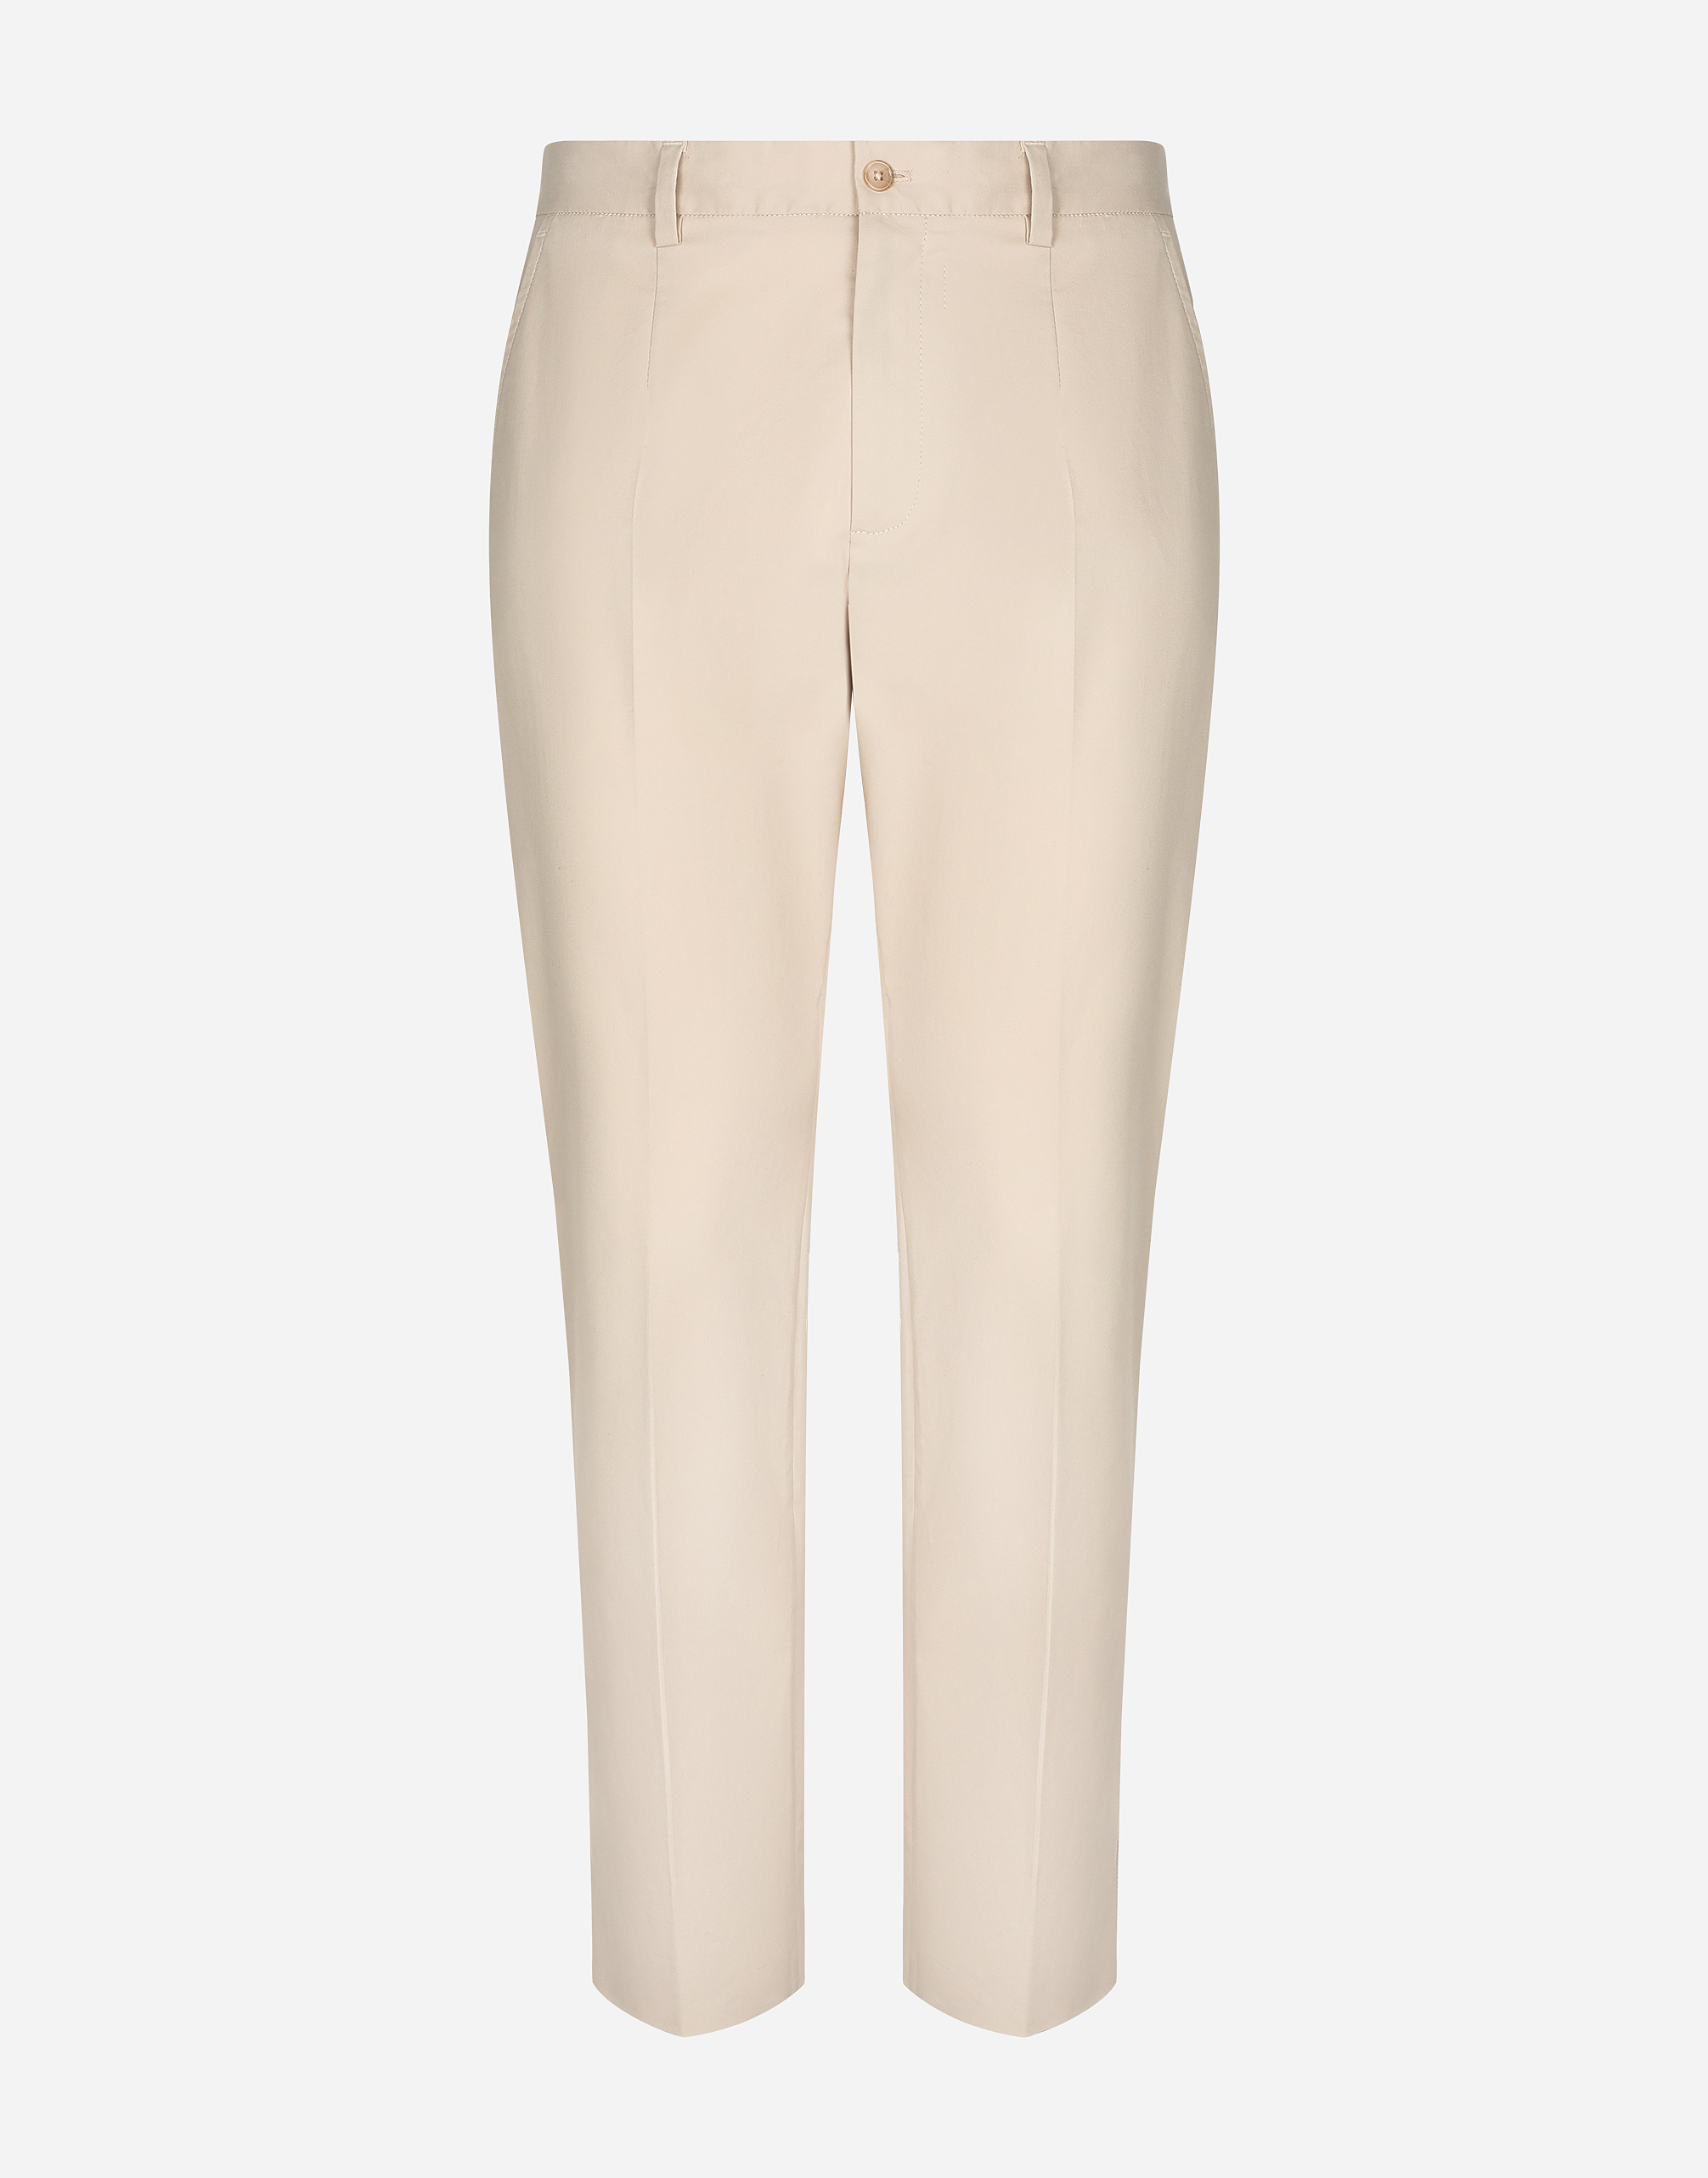 Dolce & Gabbana Stretch Cotton Pants With Branded Tag In Beige